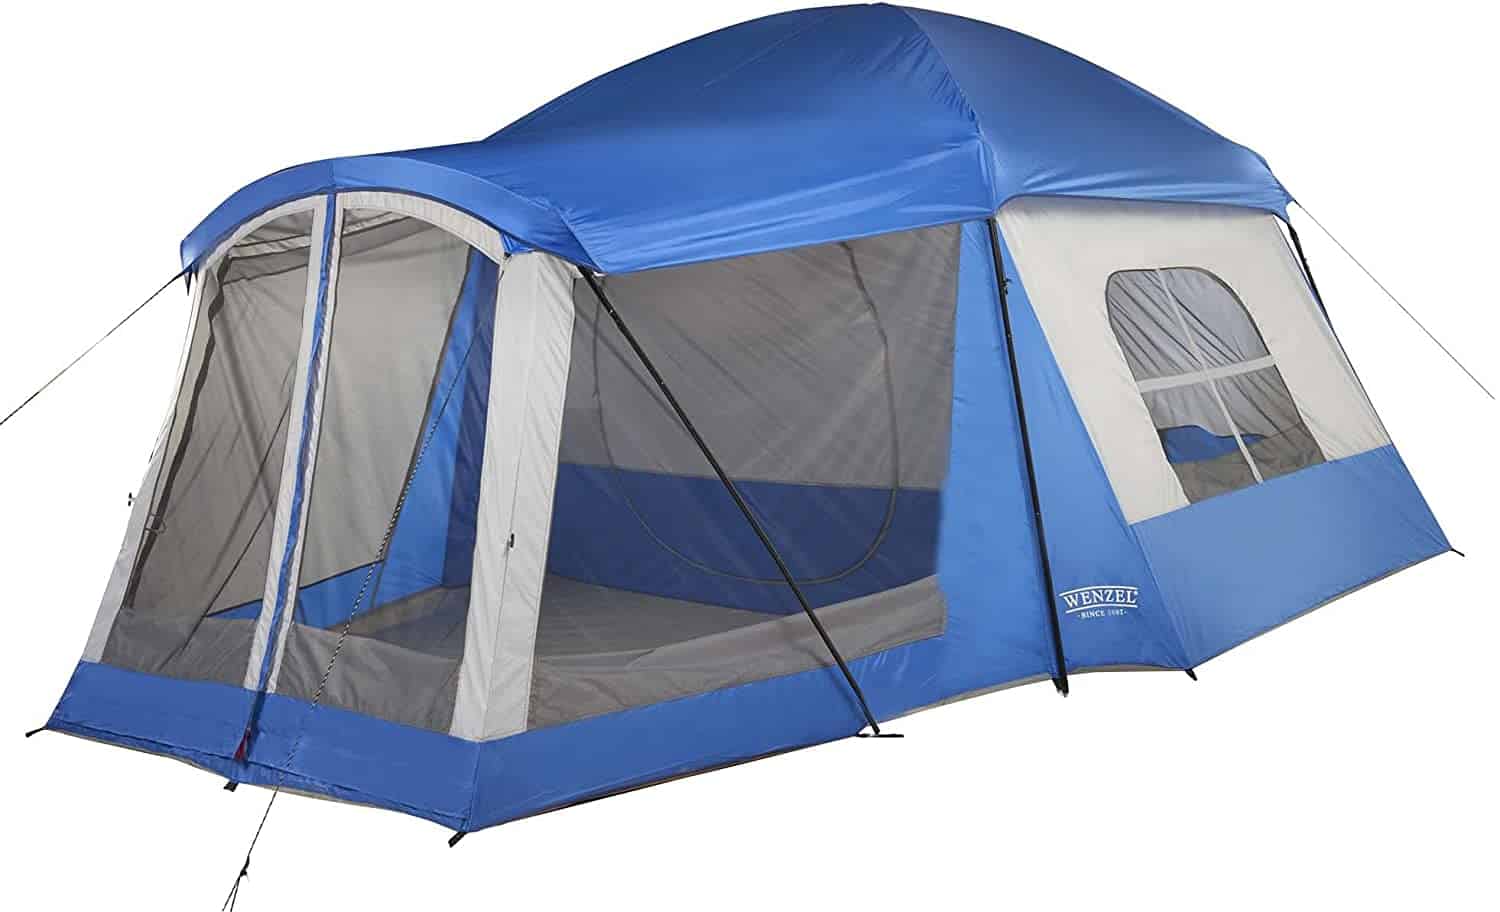 Best Camping Tent With Air Conditioner Port